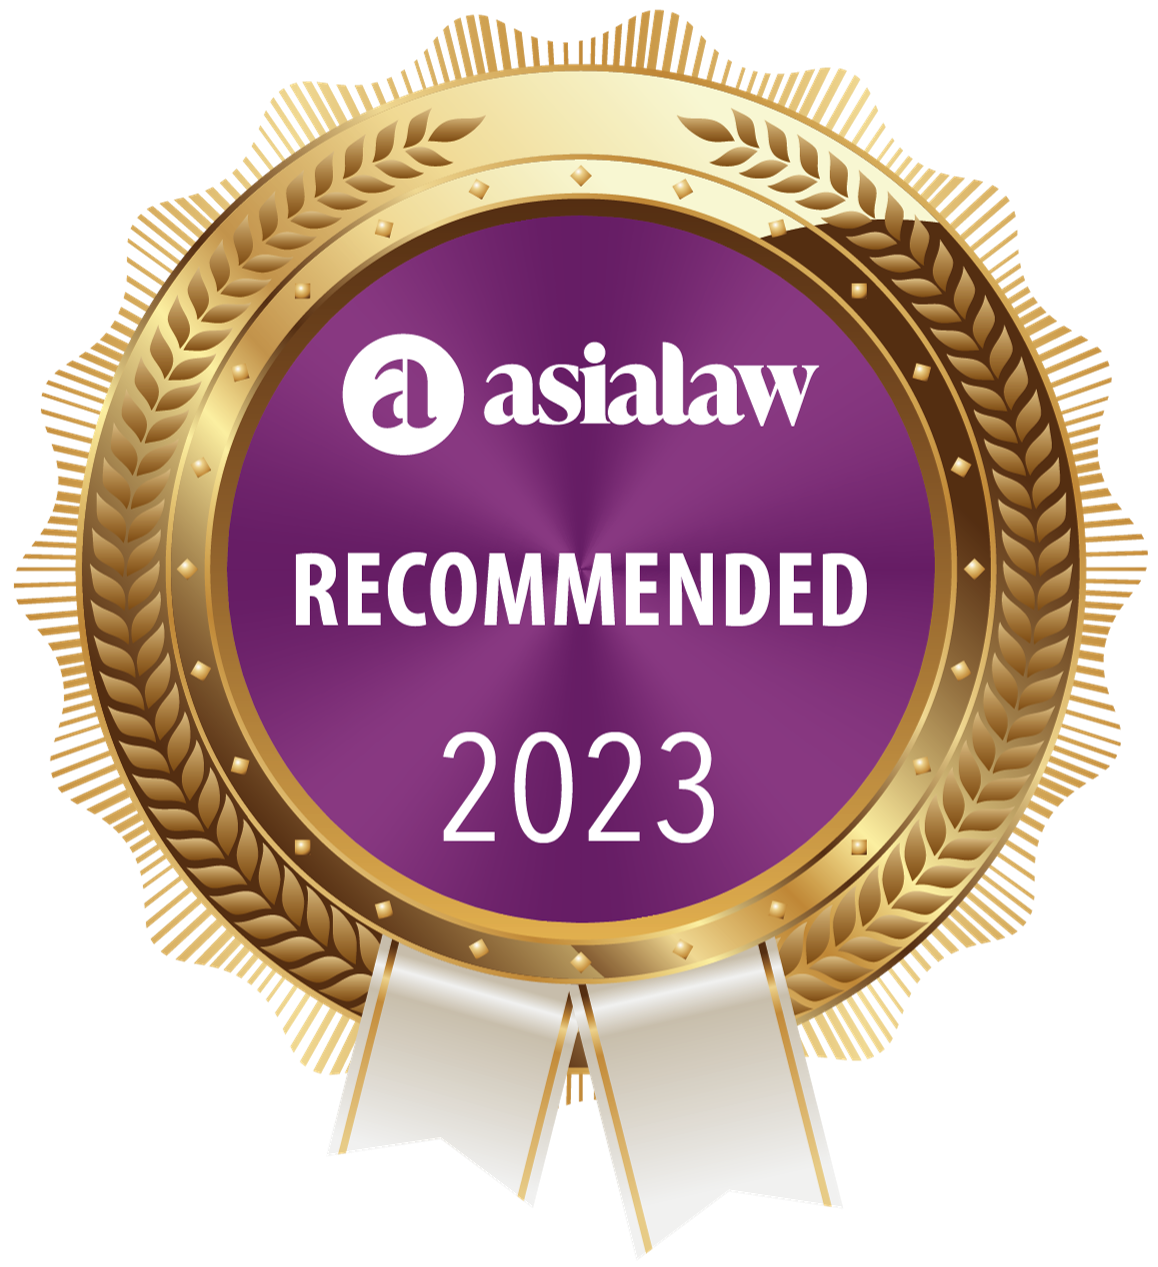 Ranked "Recommended Firm" in Capital Markets; and "Notable Firm" in Corporate and M&A, Dispute Resolution, Regulatory by asialaw 2022/23